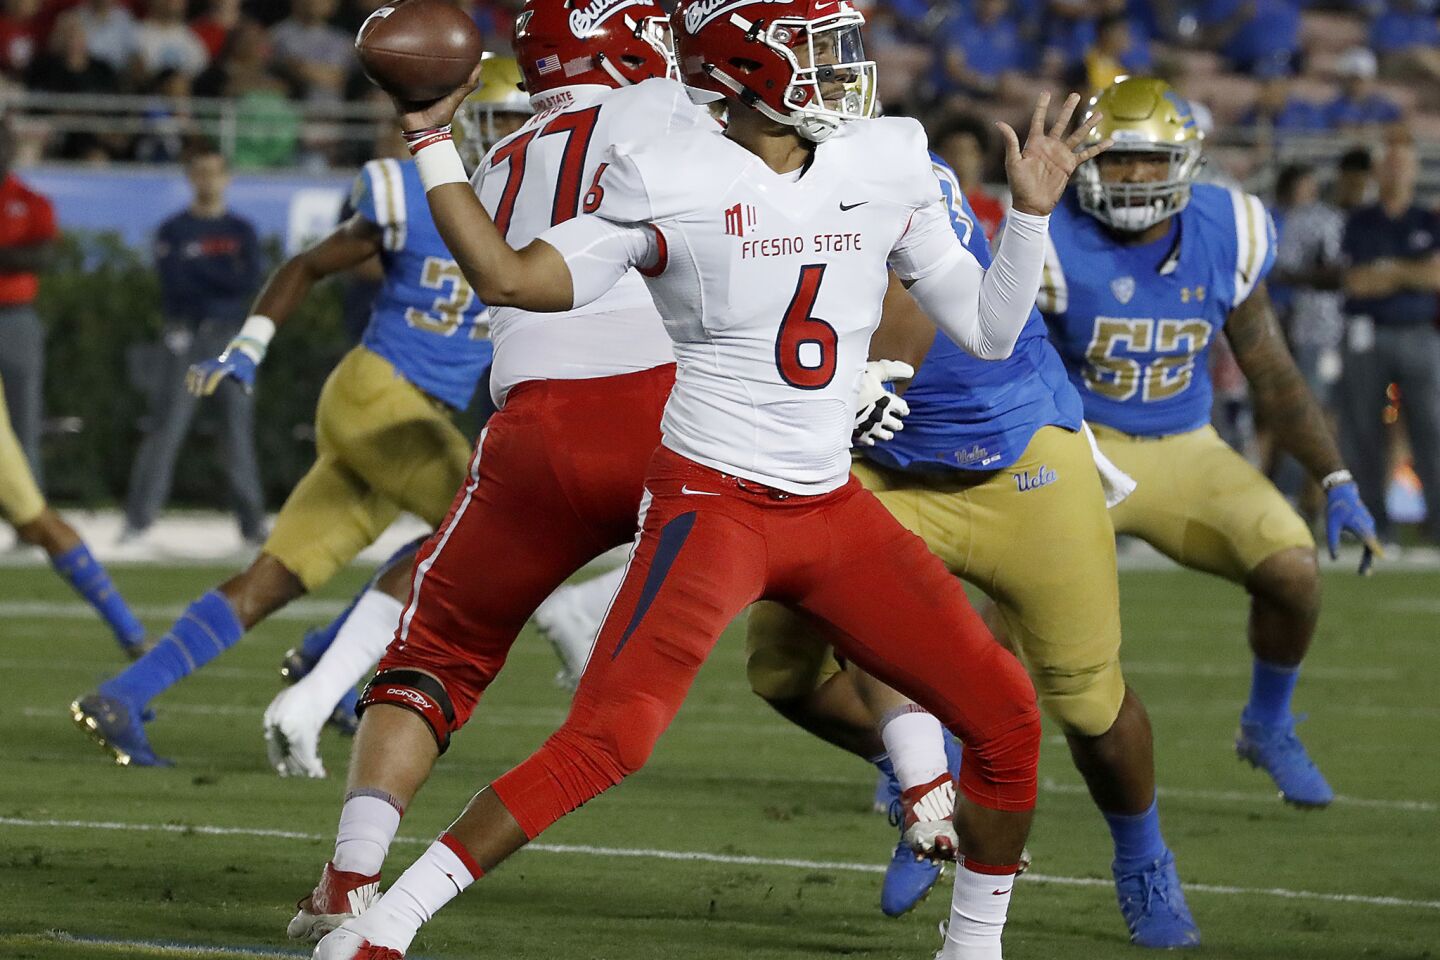 Fresno State quarterback Marcus McMaryion throws downfield against the Bruins in the first quarter on Saturday at the Rose Bowl.